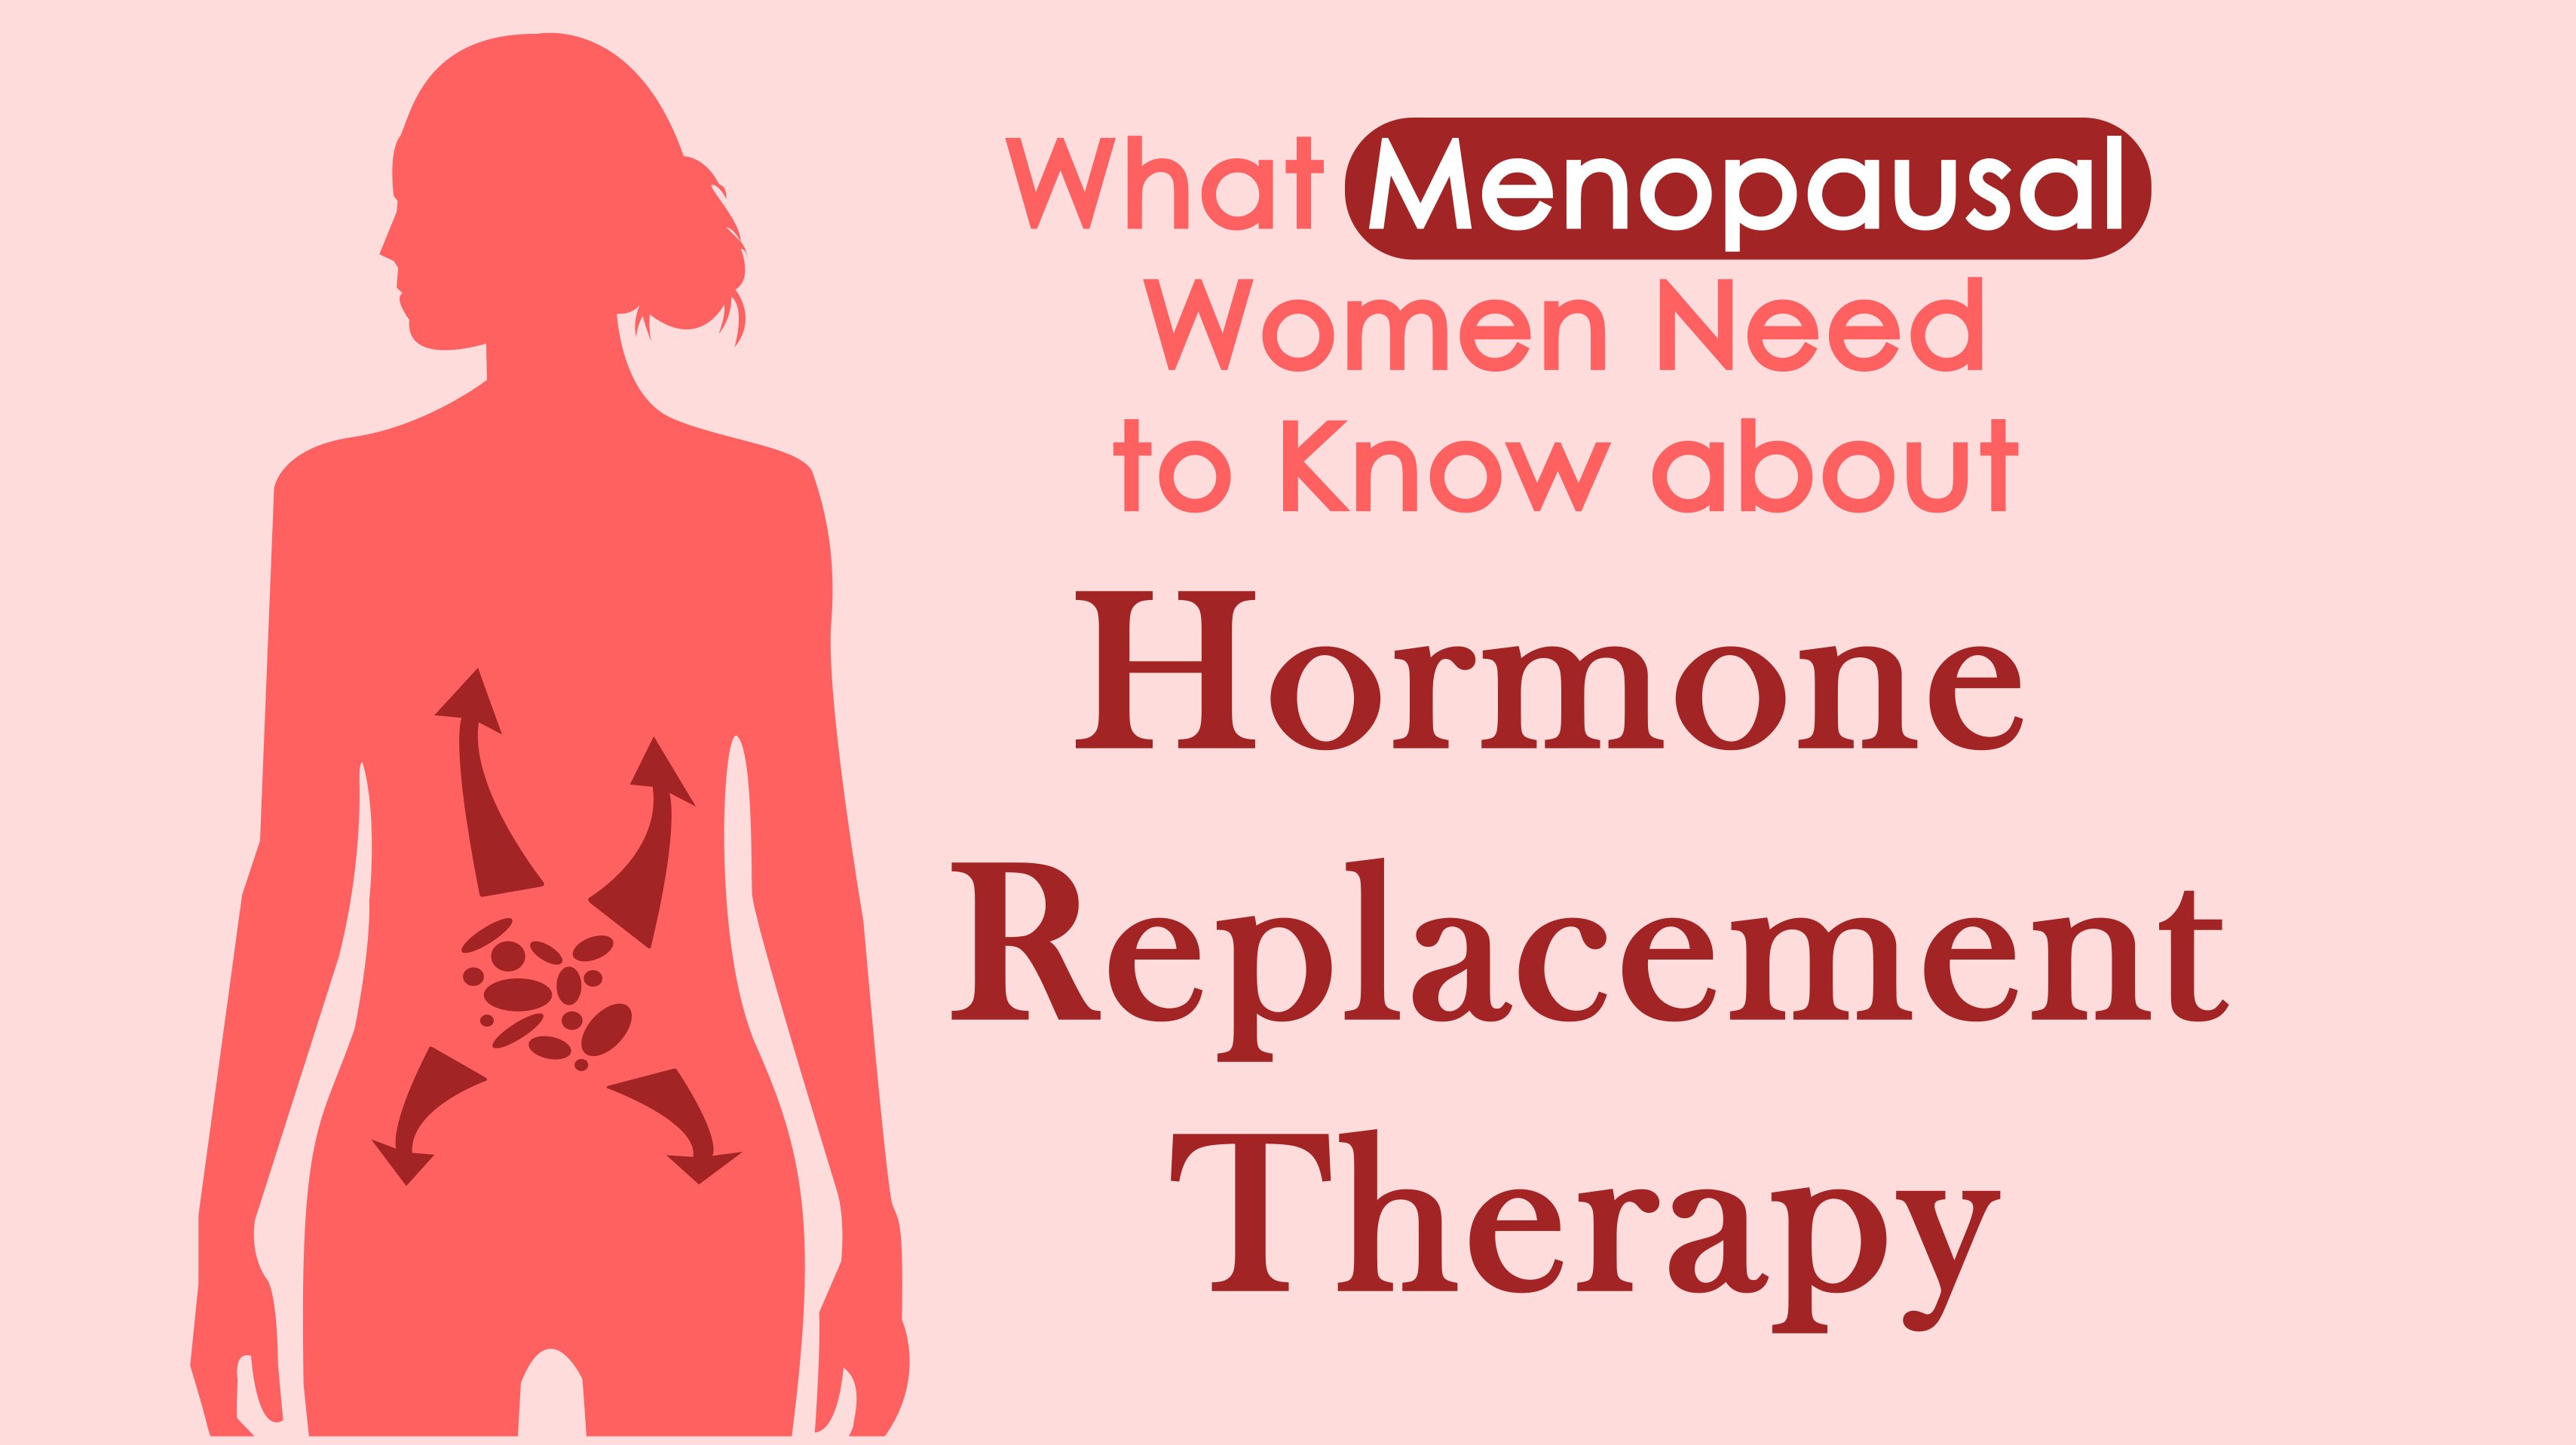 4 Ways to Take Hormone Replacement Therapy - wikiHow